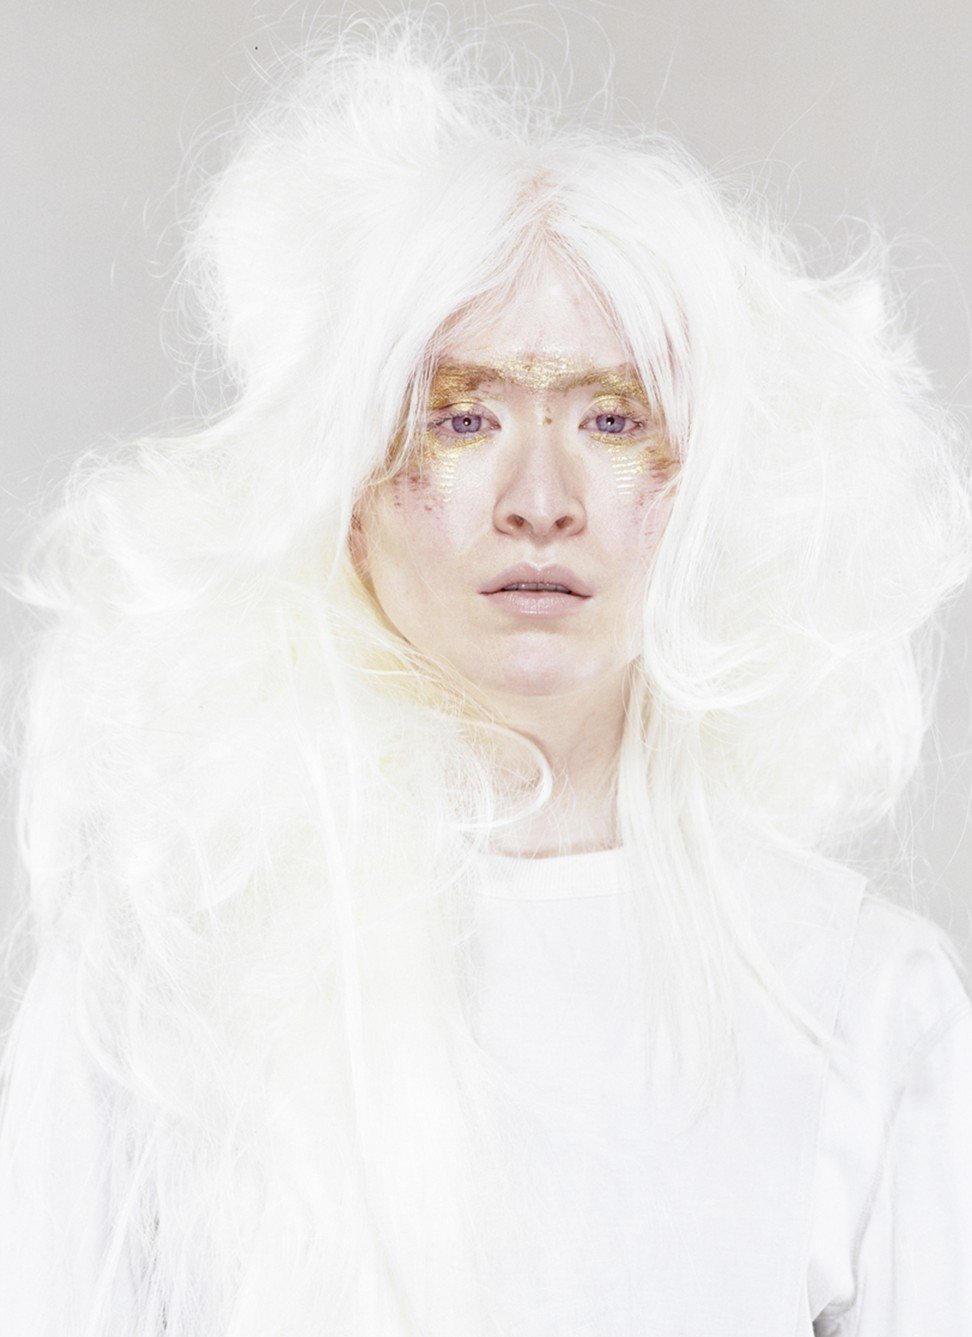 World S First Albino Model Connie Chiu On Growing Up In Kowloon And Diversity On The Catwalk South China Morning Post